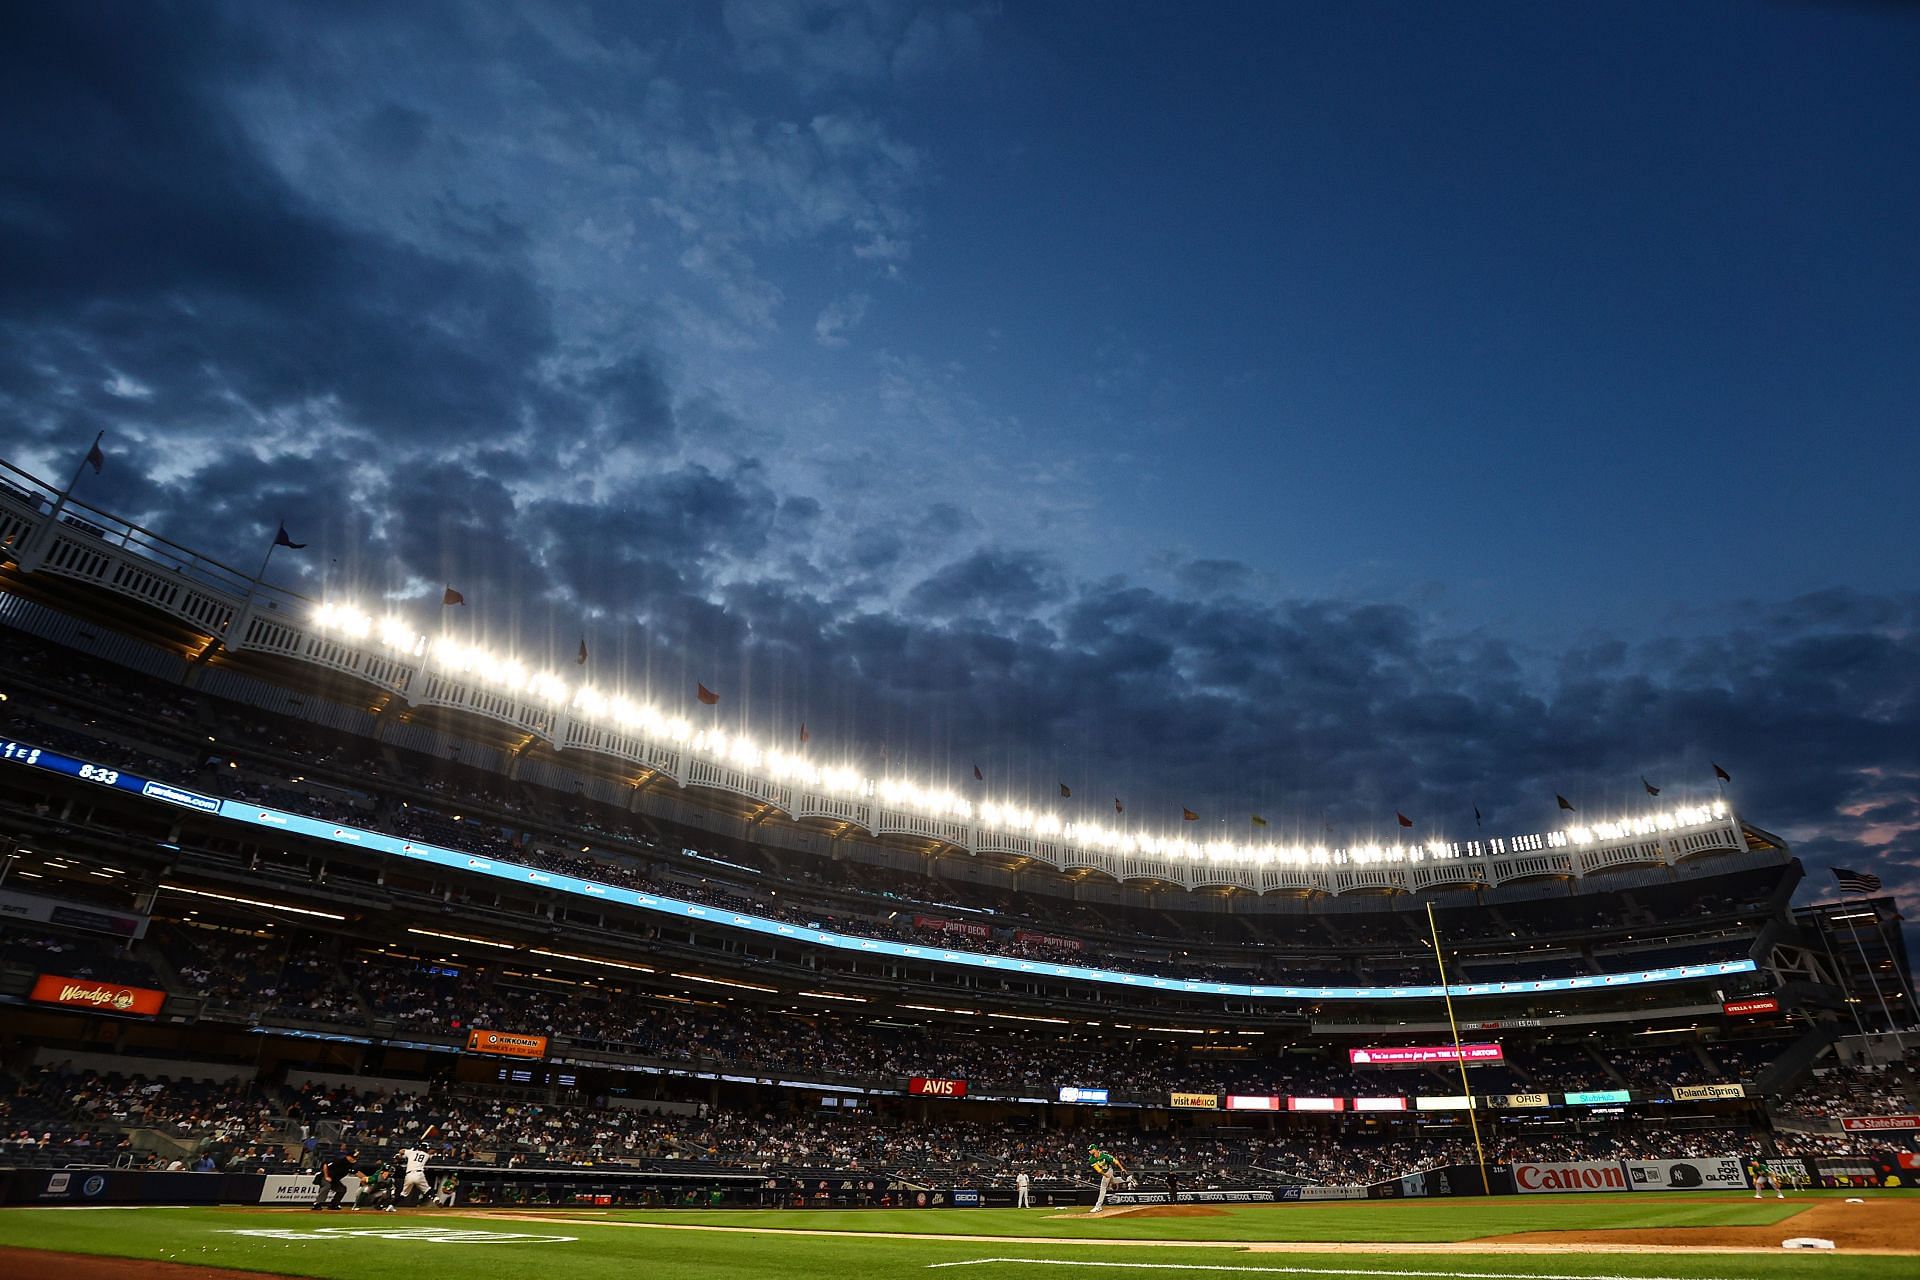 A nighttime view of the New Yankee Stadium